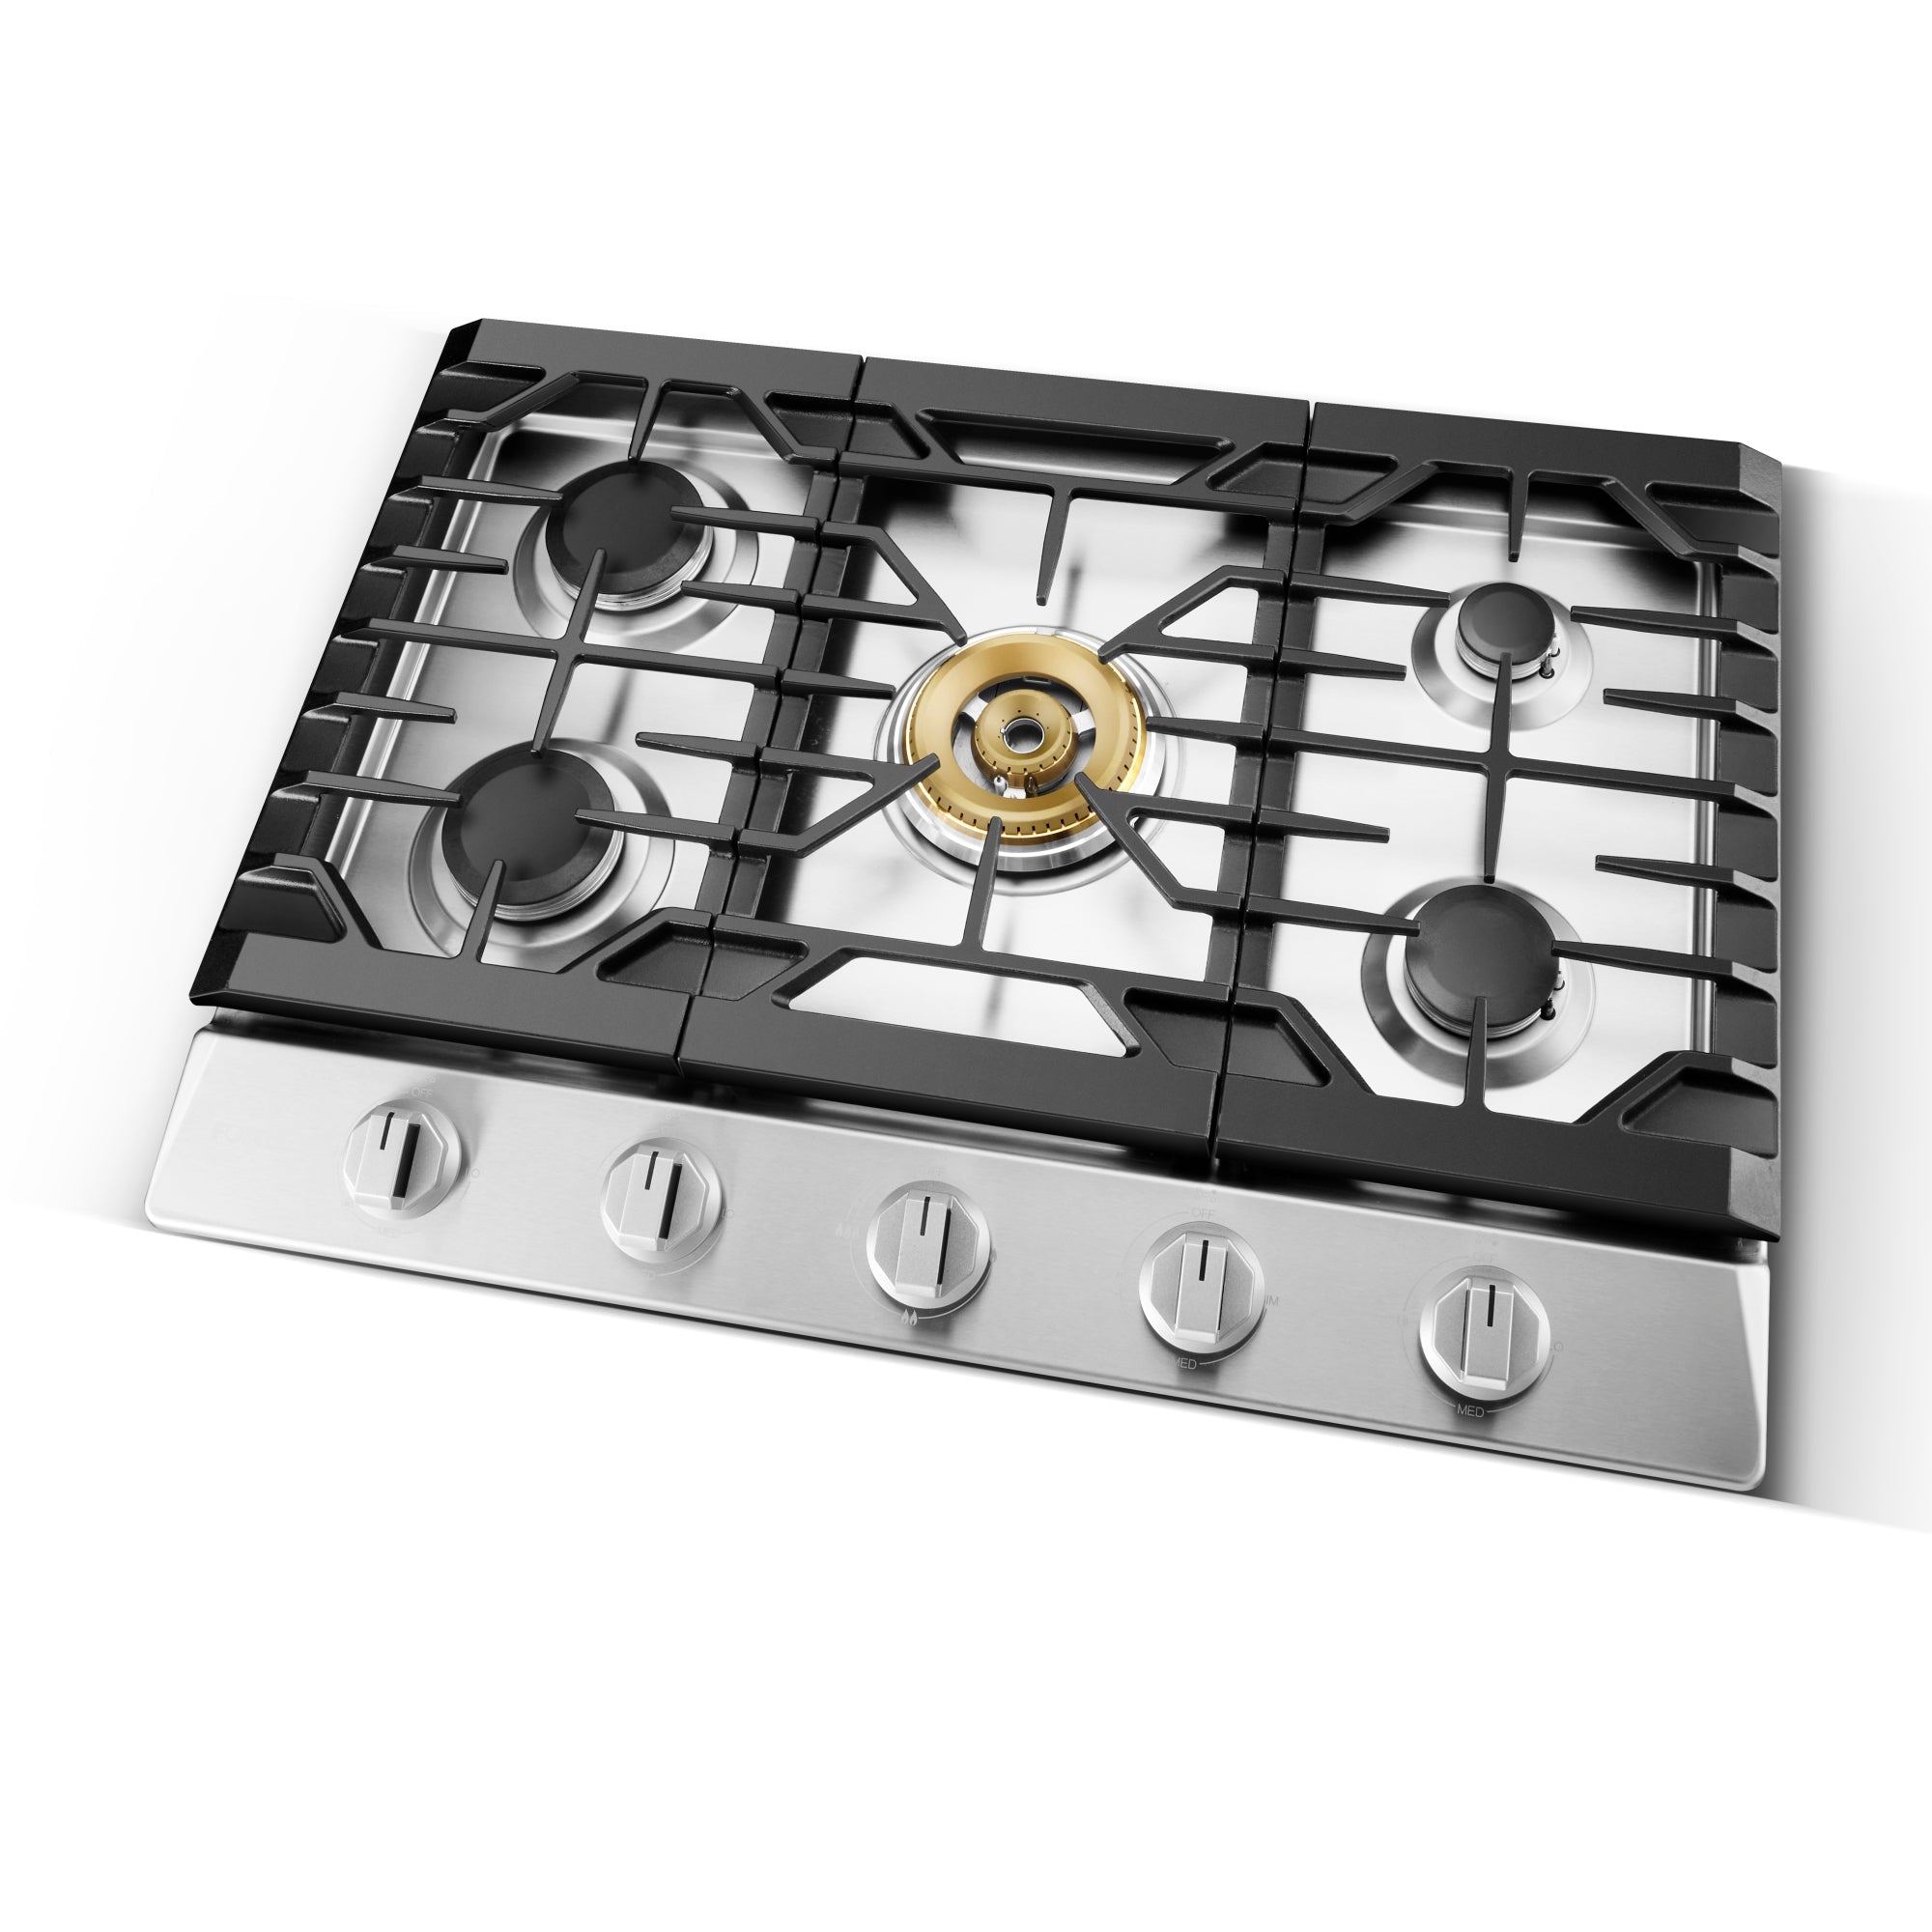 Fotile Tri-Ring Series 30 in. Gas Cooktop with 5 Burners in Stainless Steel (GLS30501)